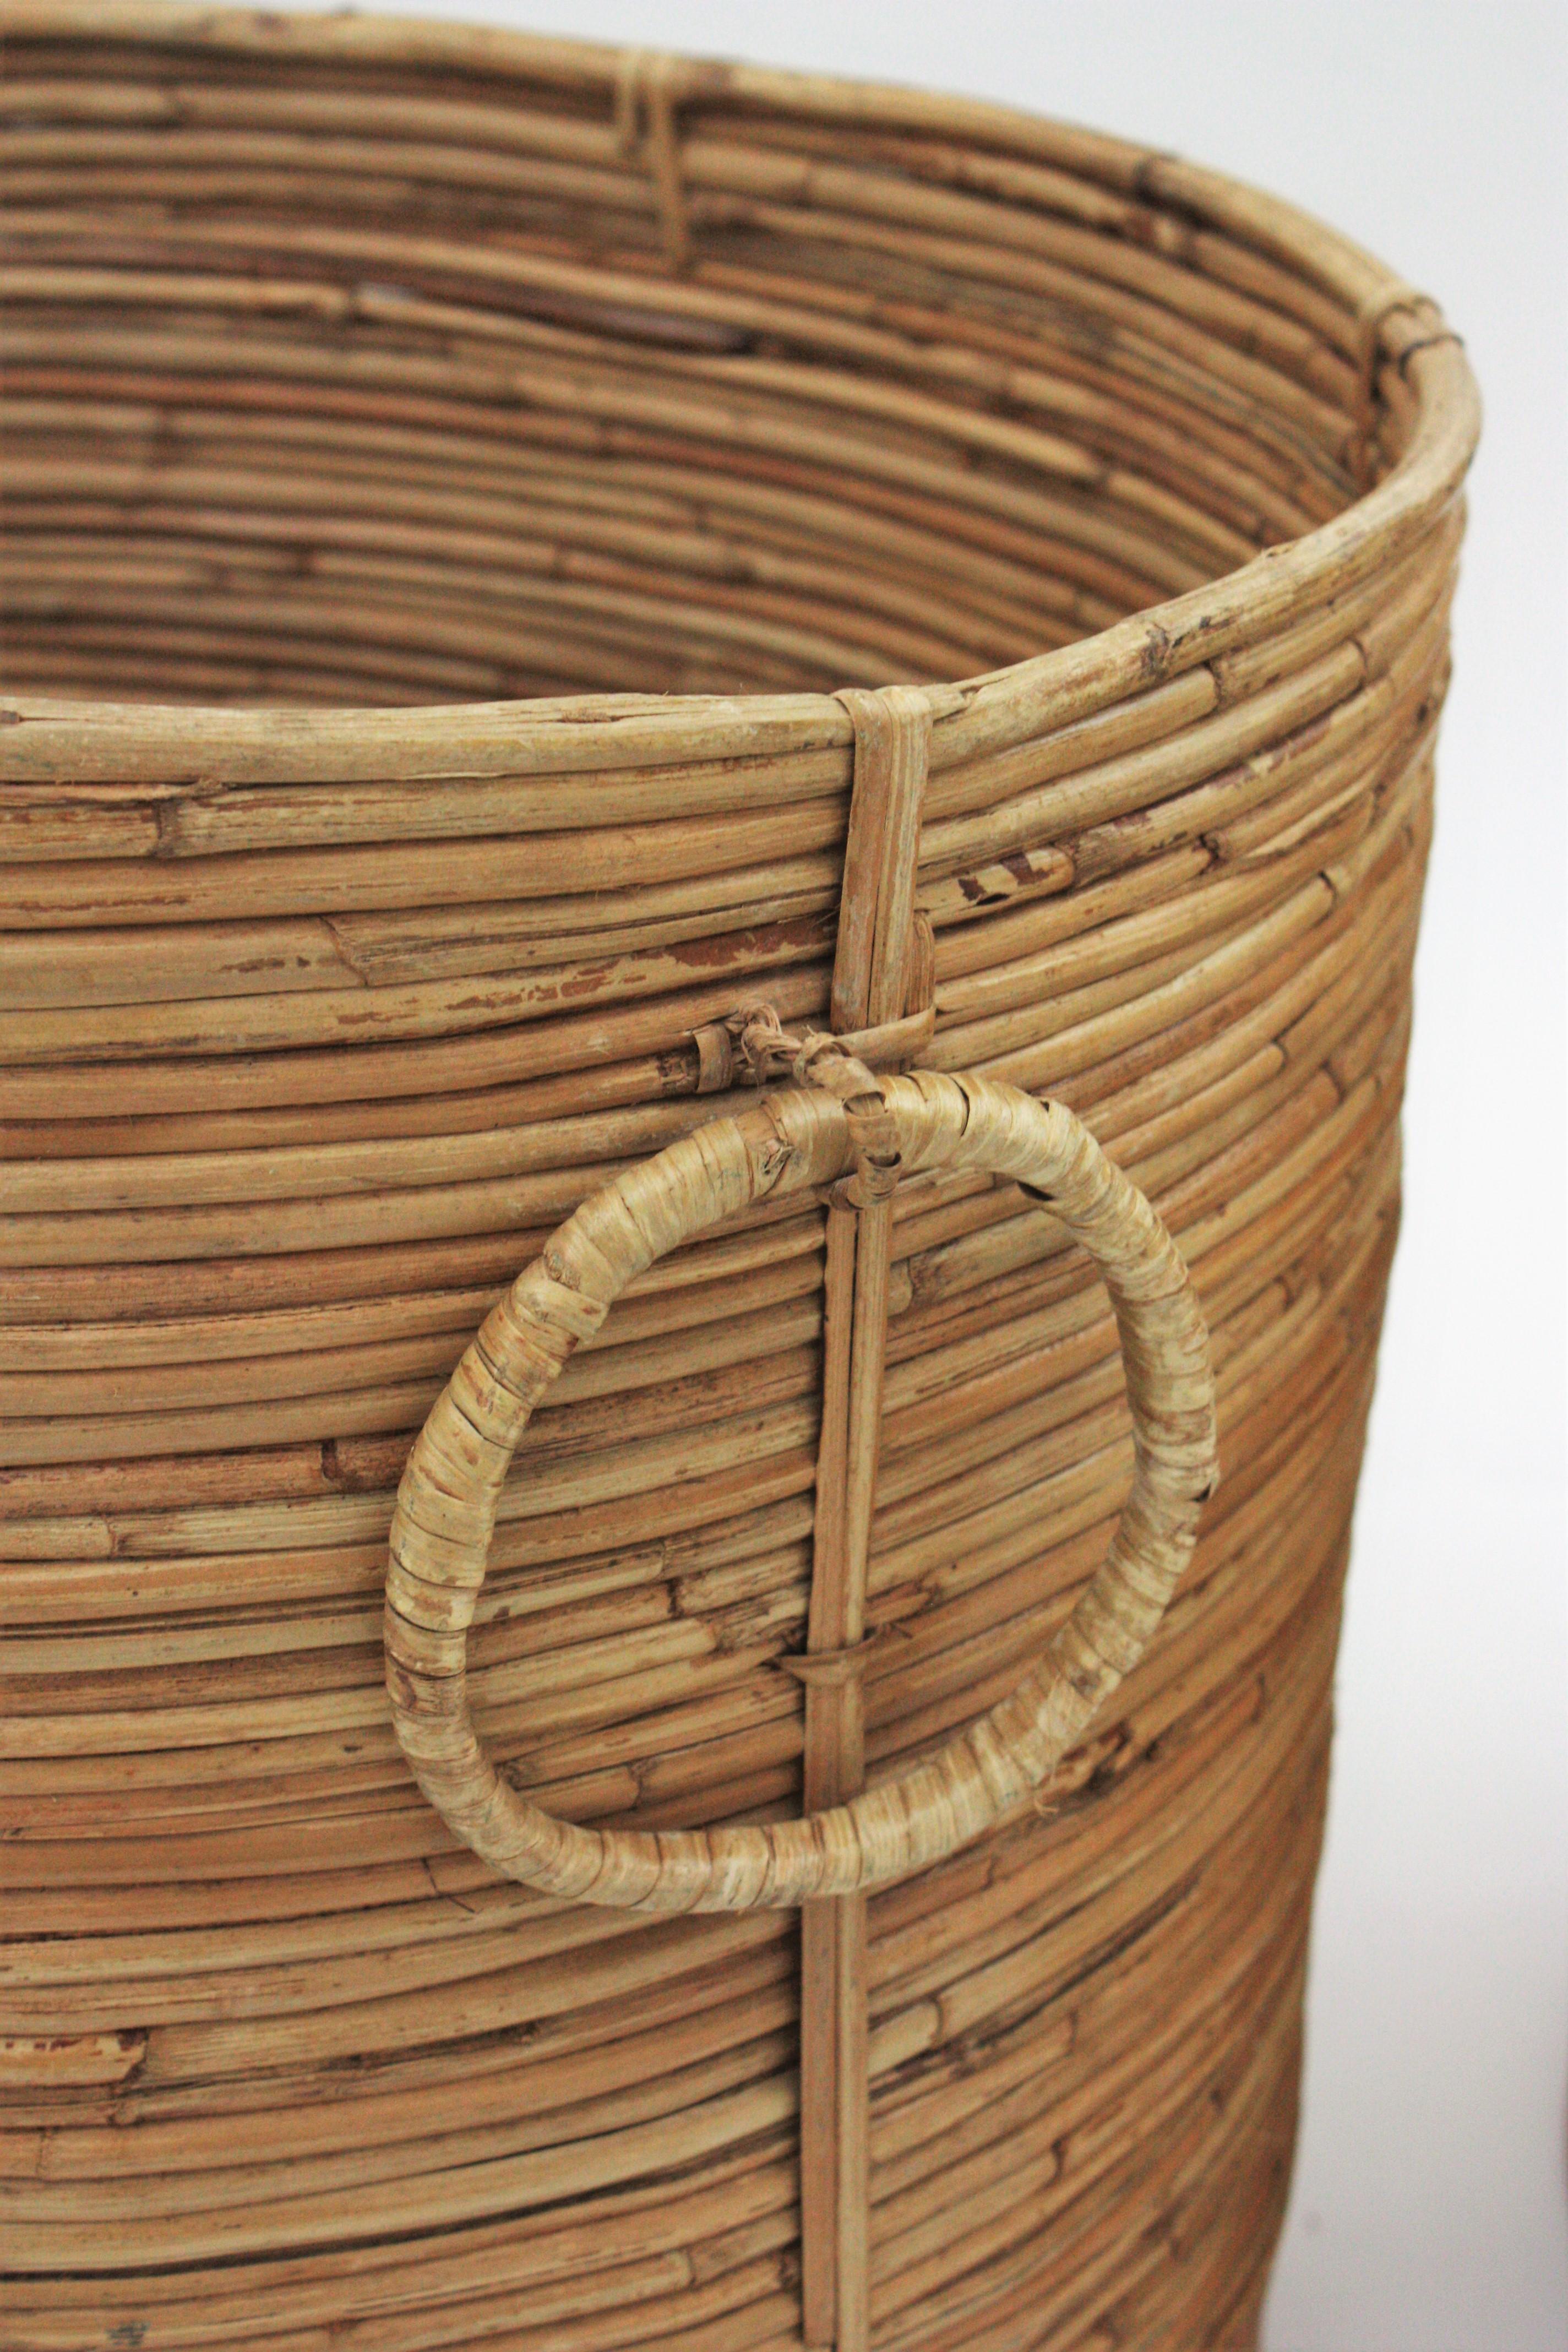 Hand-Crafted Pair of Rattan Large Round Planters or Baskets with Ring Handles, 1970s